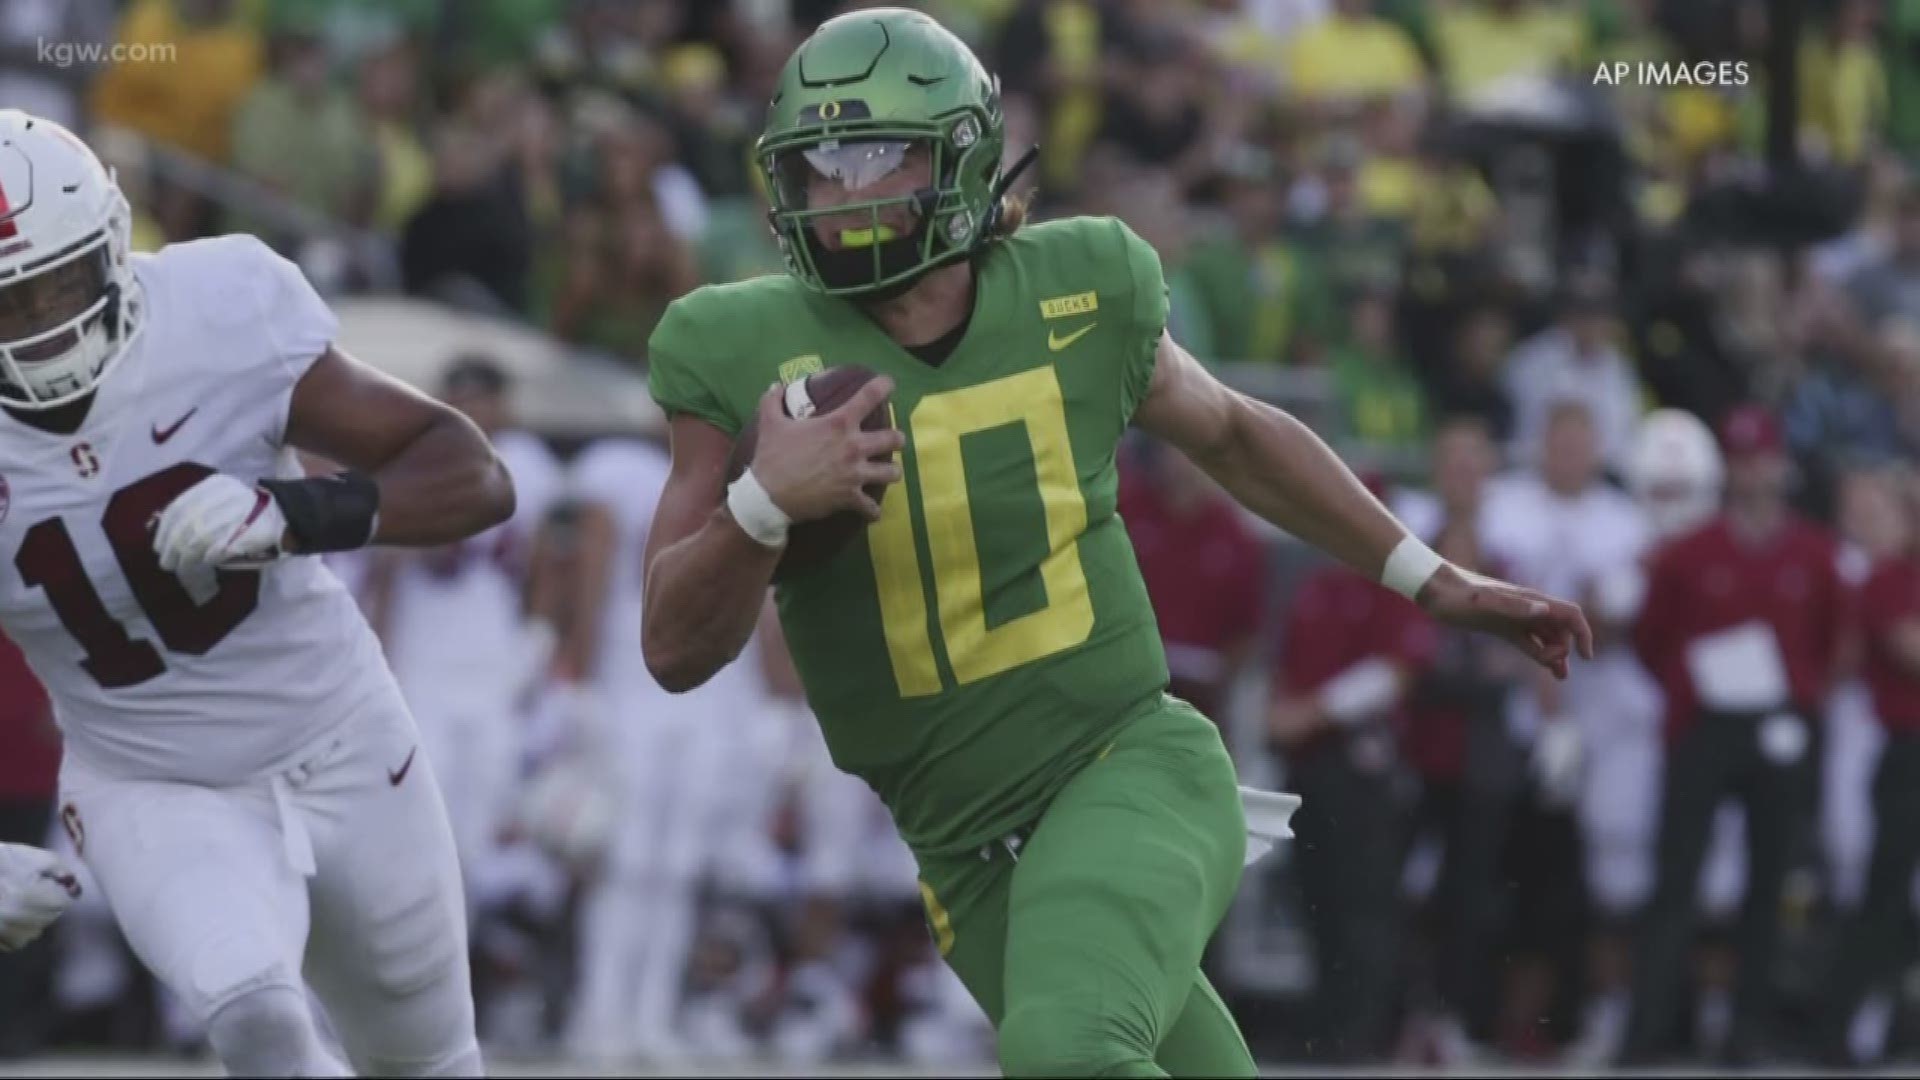 Expectations are high for the Ducks. Will Oregon live up to the hype?